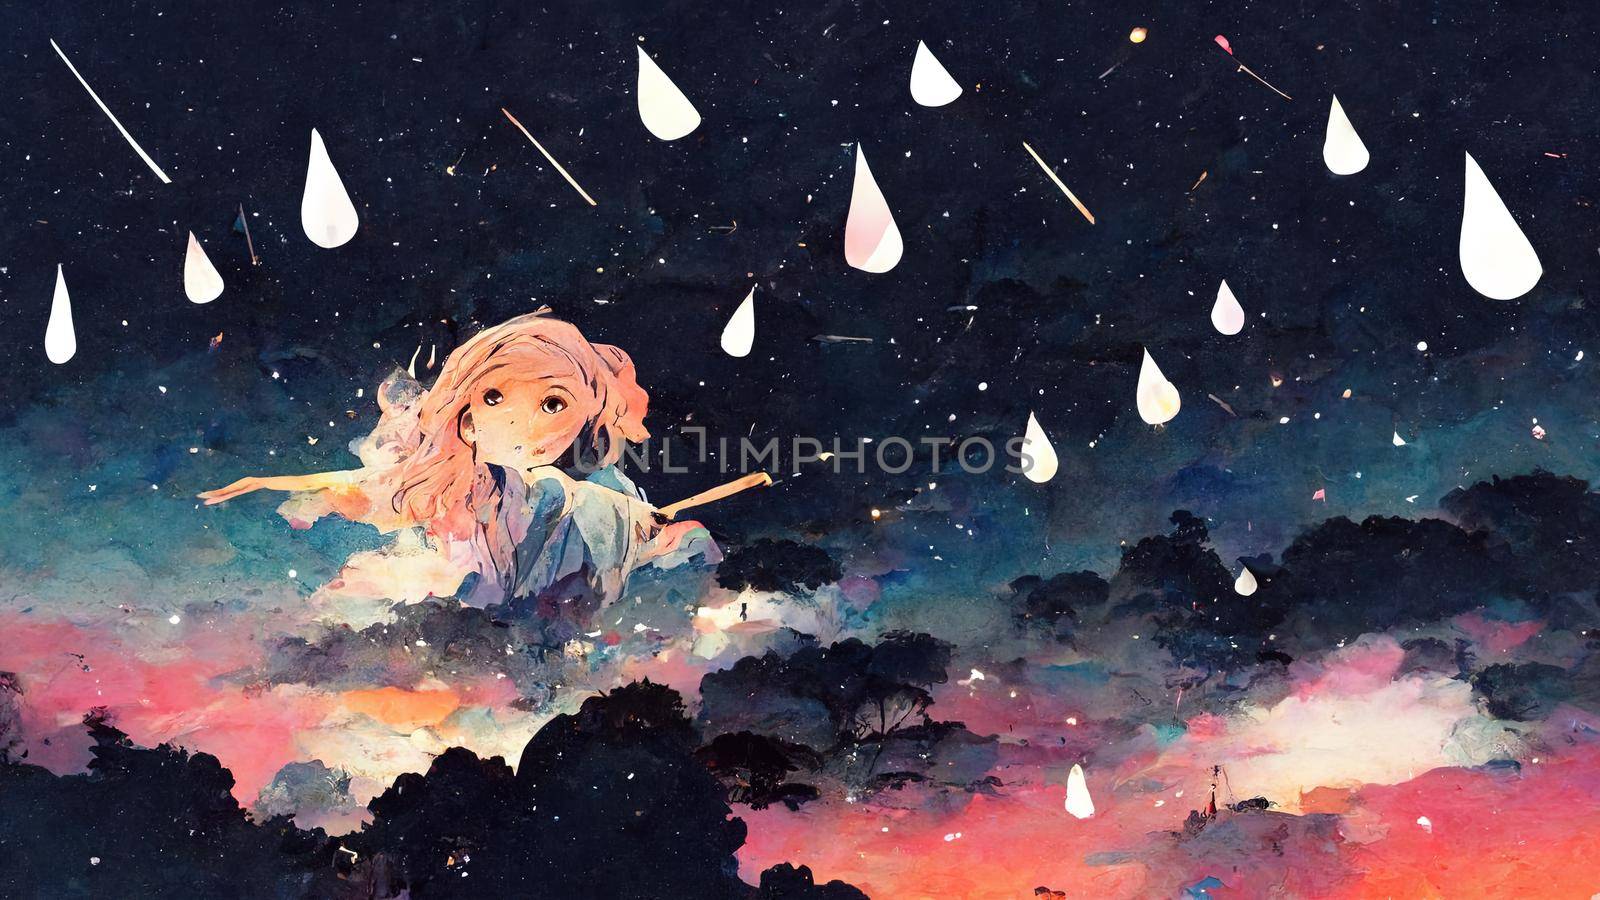 Night Sky with Falling Rain and Umbrella Girl Illustration anime style by 2ragon